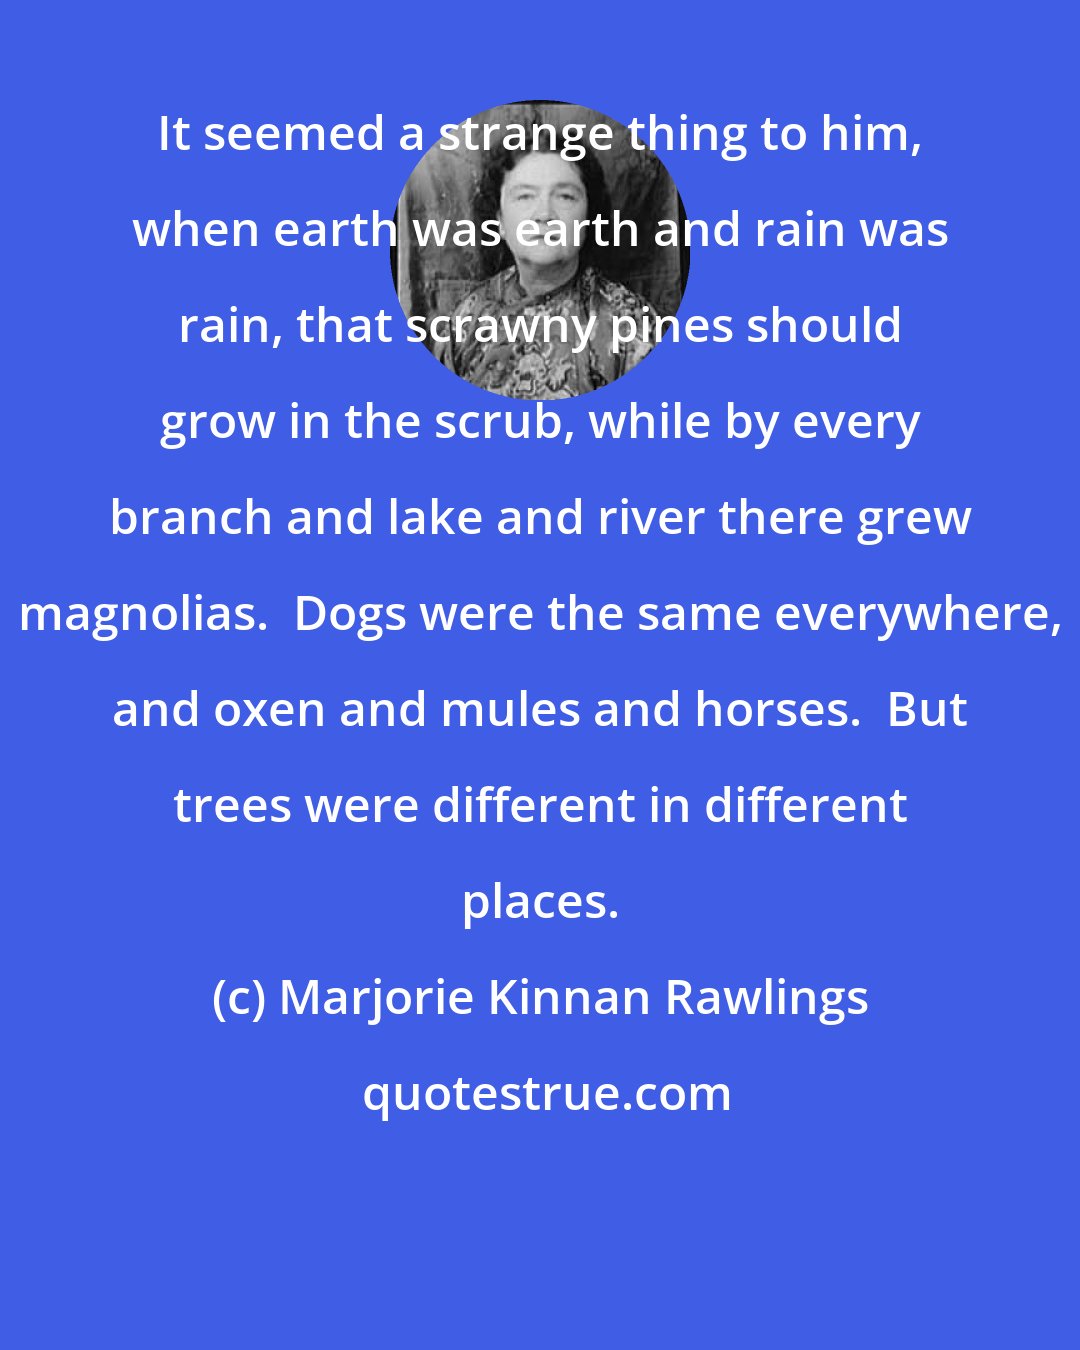 Marjorie Kinnan Rawlings: It seemed a strange thing to him, when earth was earth and rain was rain, that scrawny pines should grow in the scrub, while by every branch and lake and river there grew magnolias.  Dogs were the same everywhere, and oxen and mules and horses.  But trees were different in different places.